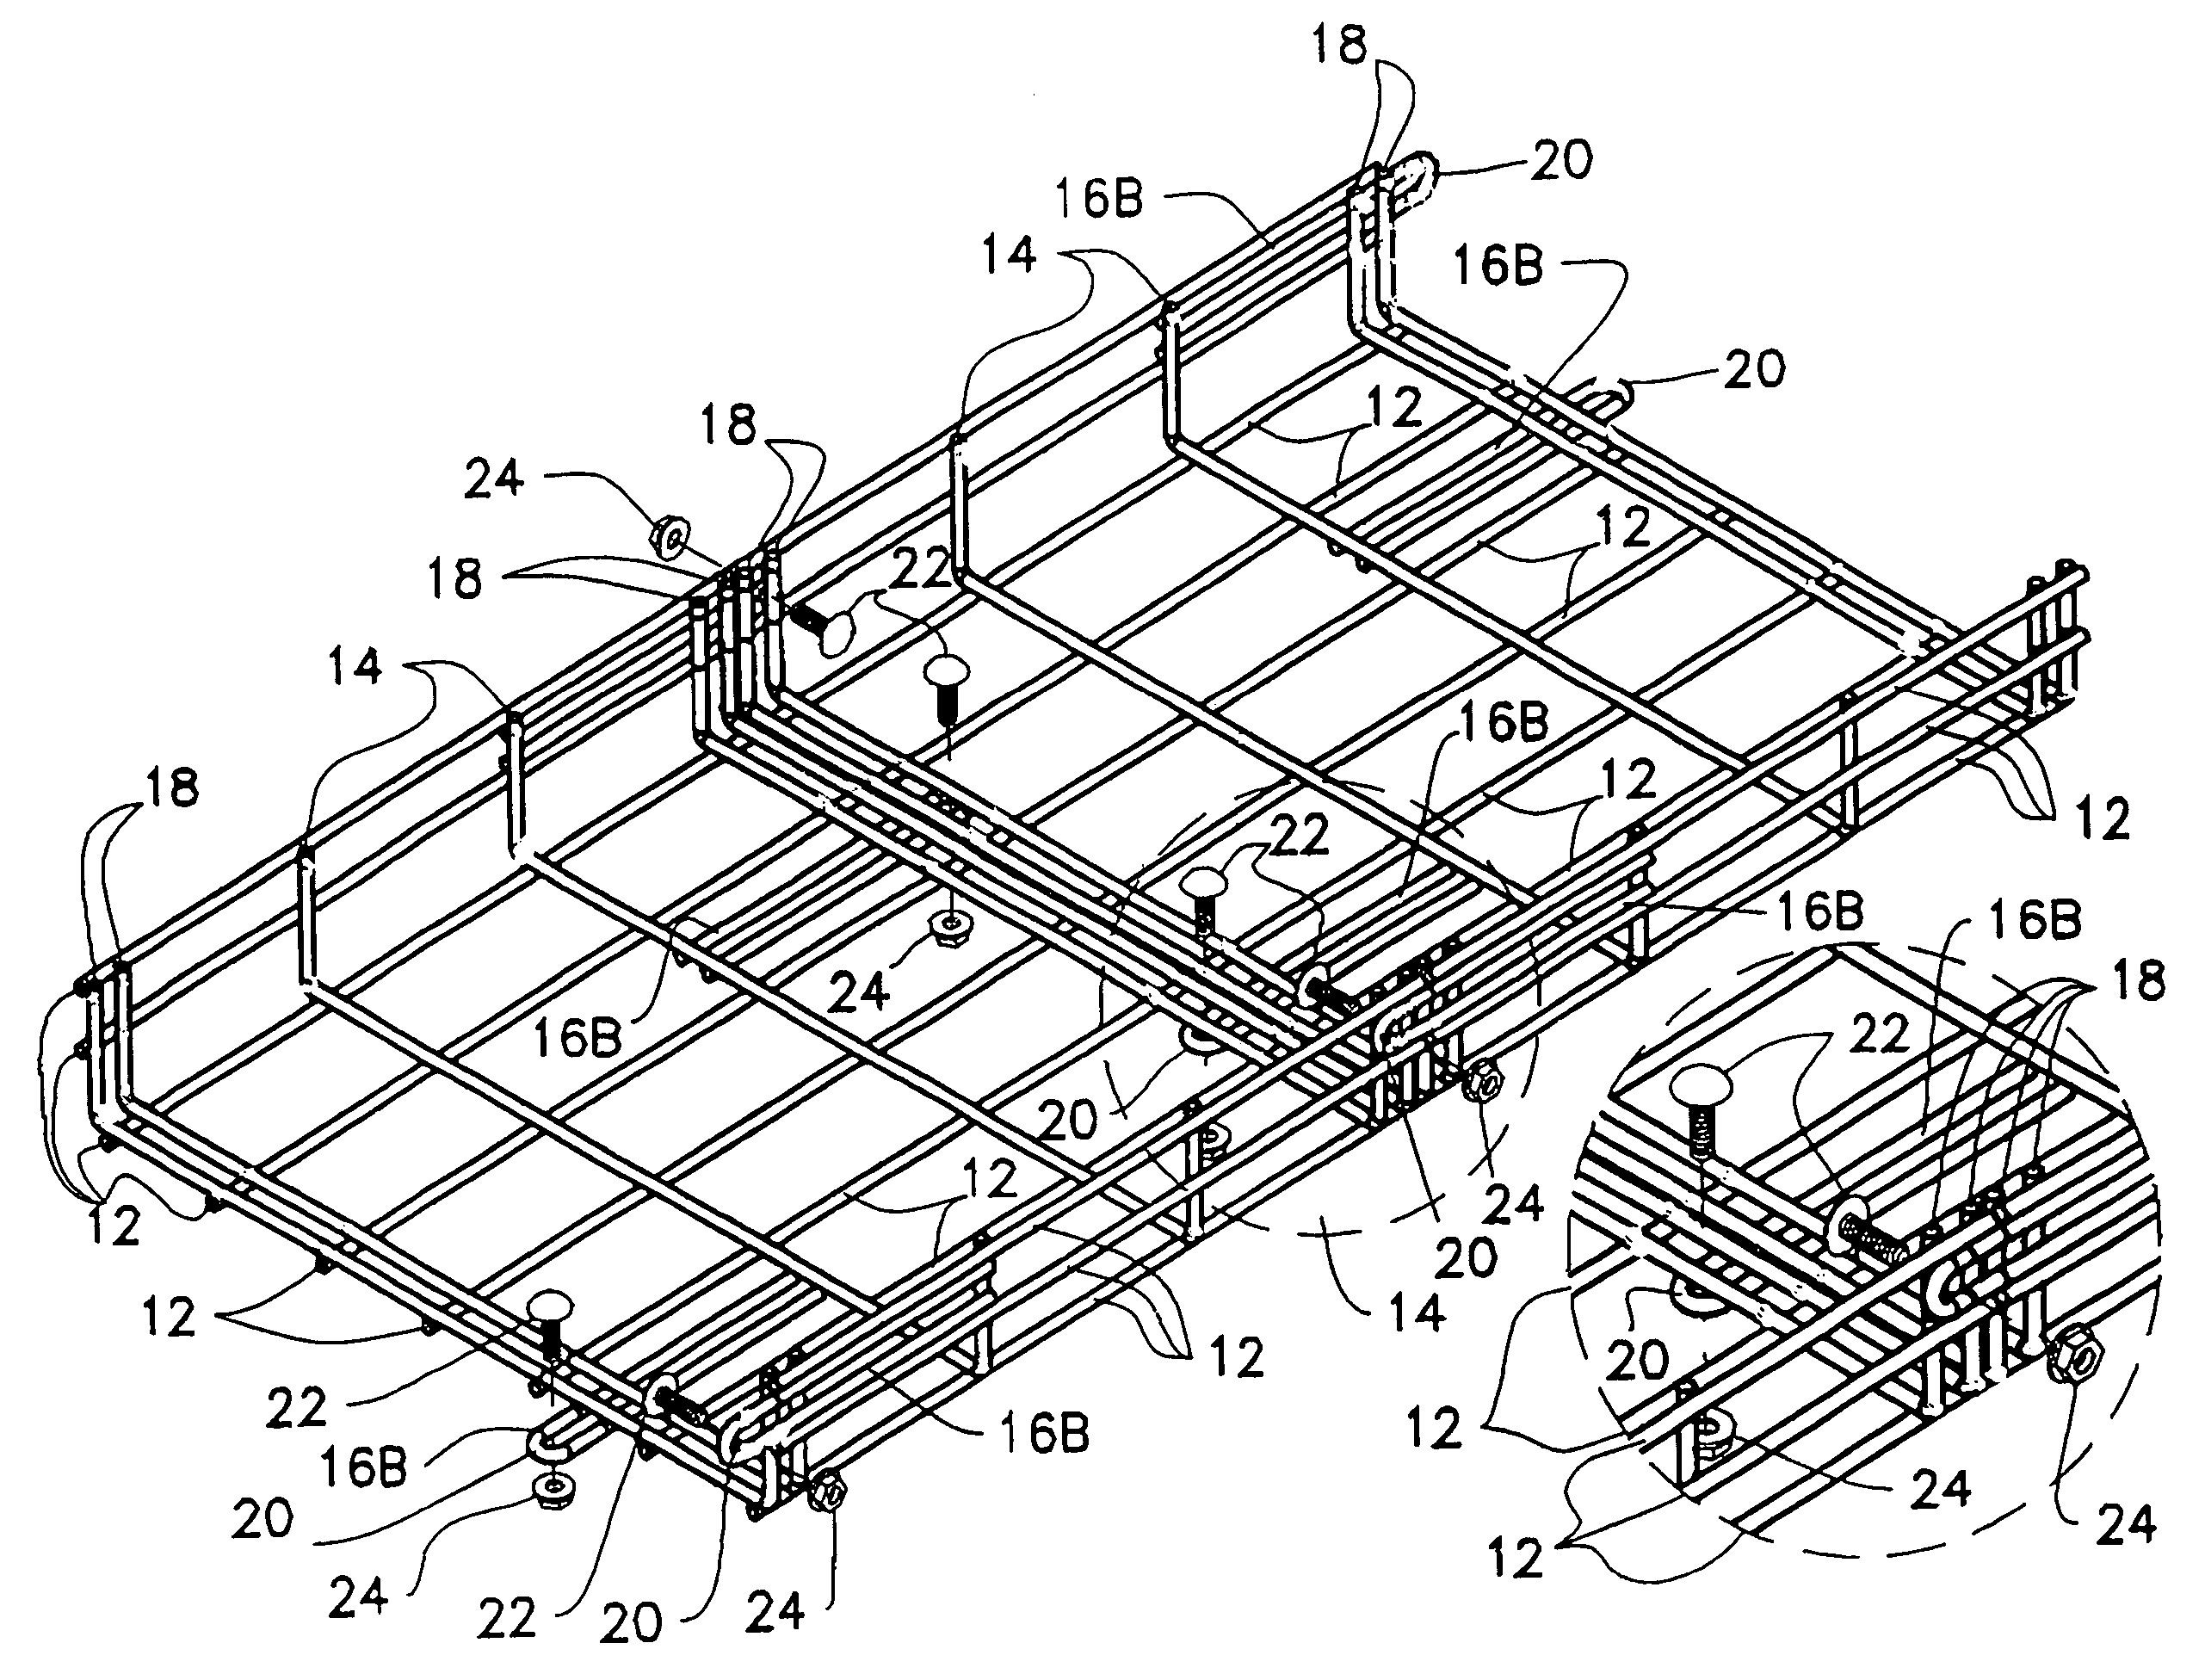 Cable tray assemblies